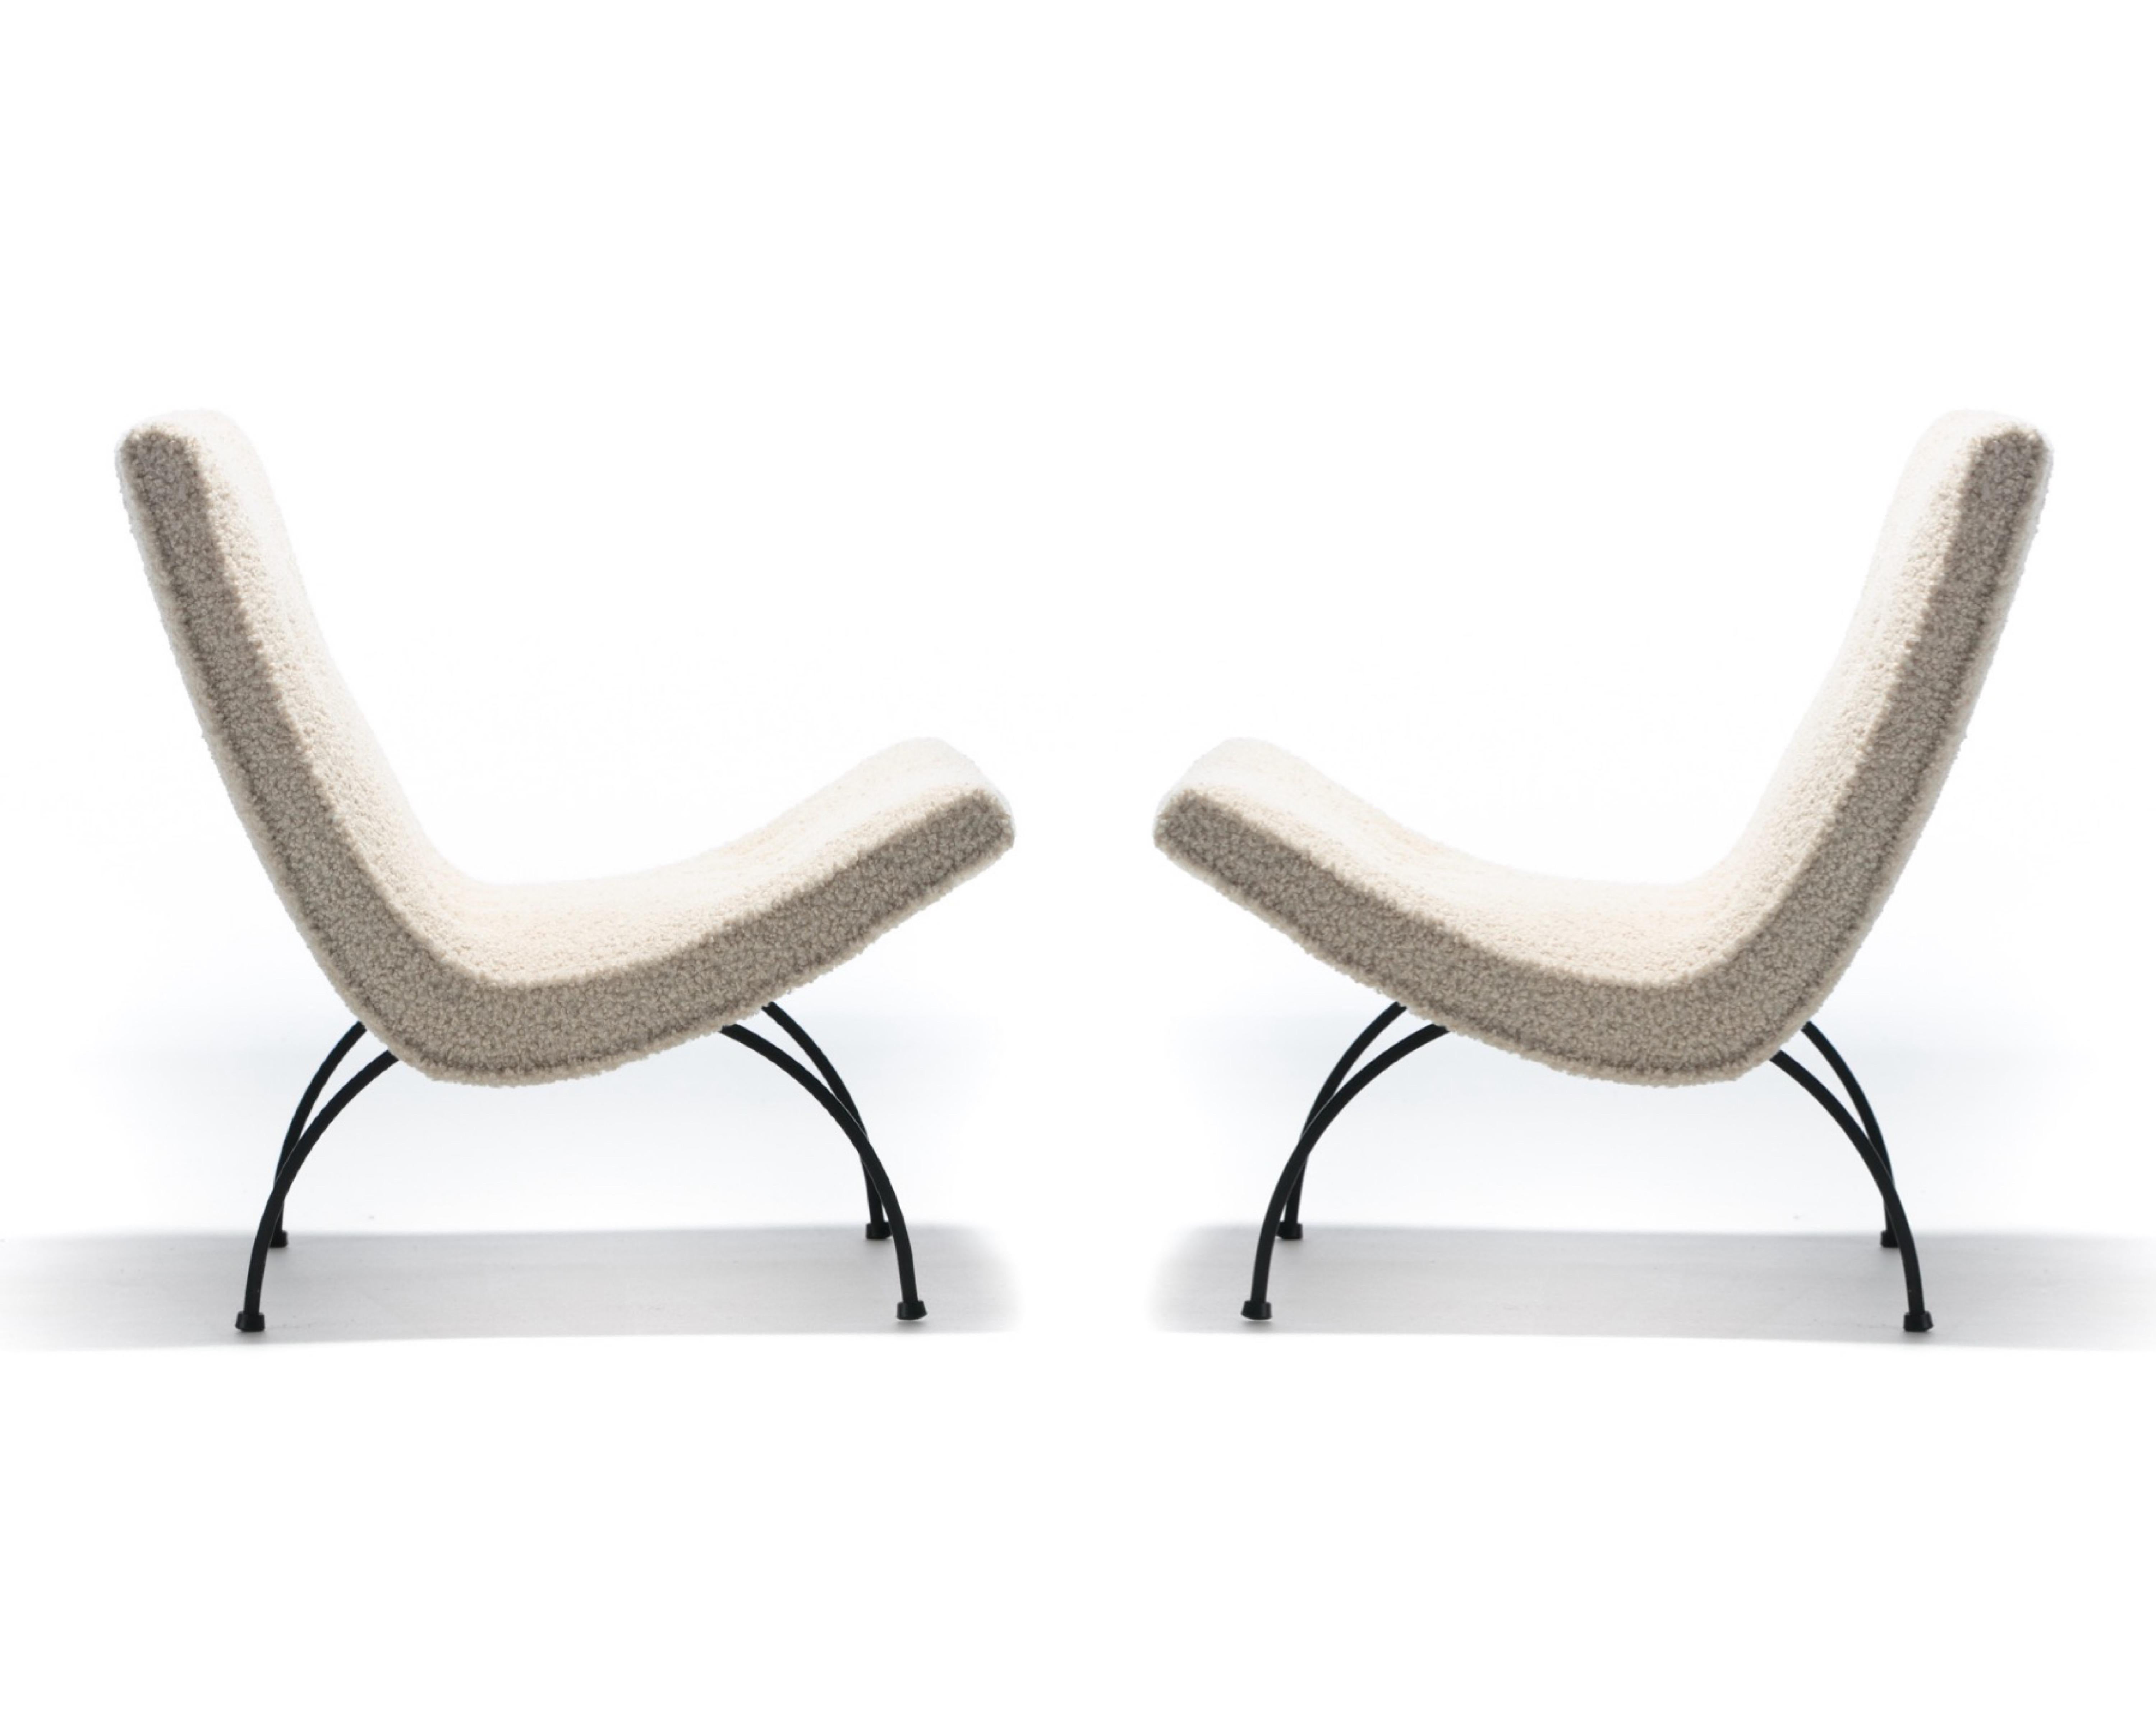 This pair of Milo Baughman 1950s scoop chairs hit all the marks with gorgeous Mid Century Modern sculptural profiles, a very comfortable ergonomic design with wide seats, and new soft ivory bouclé upholstery with a high durability rating of over